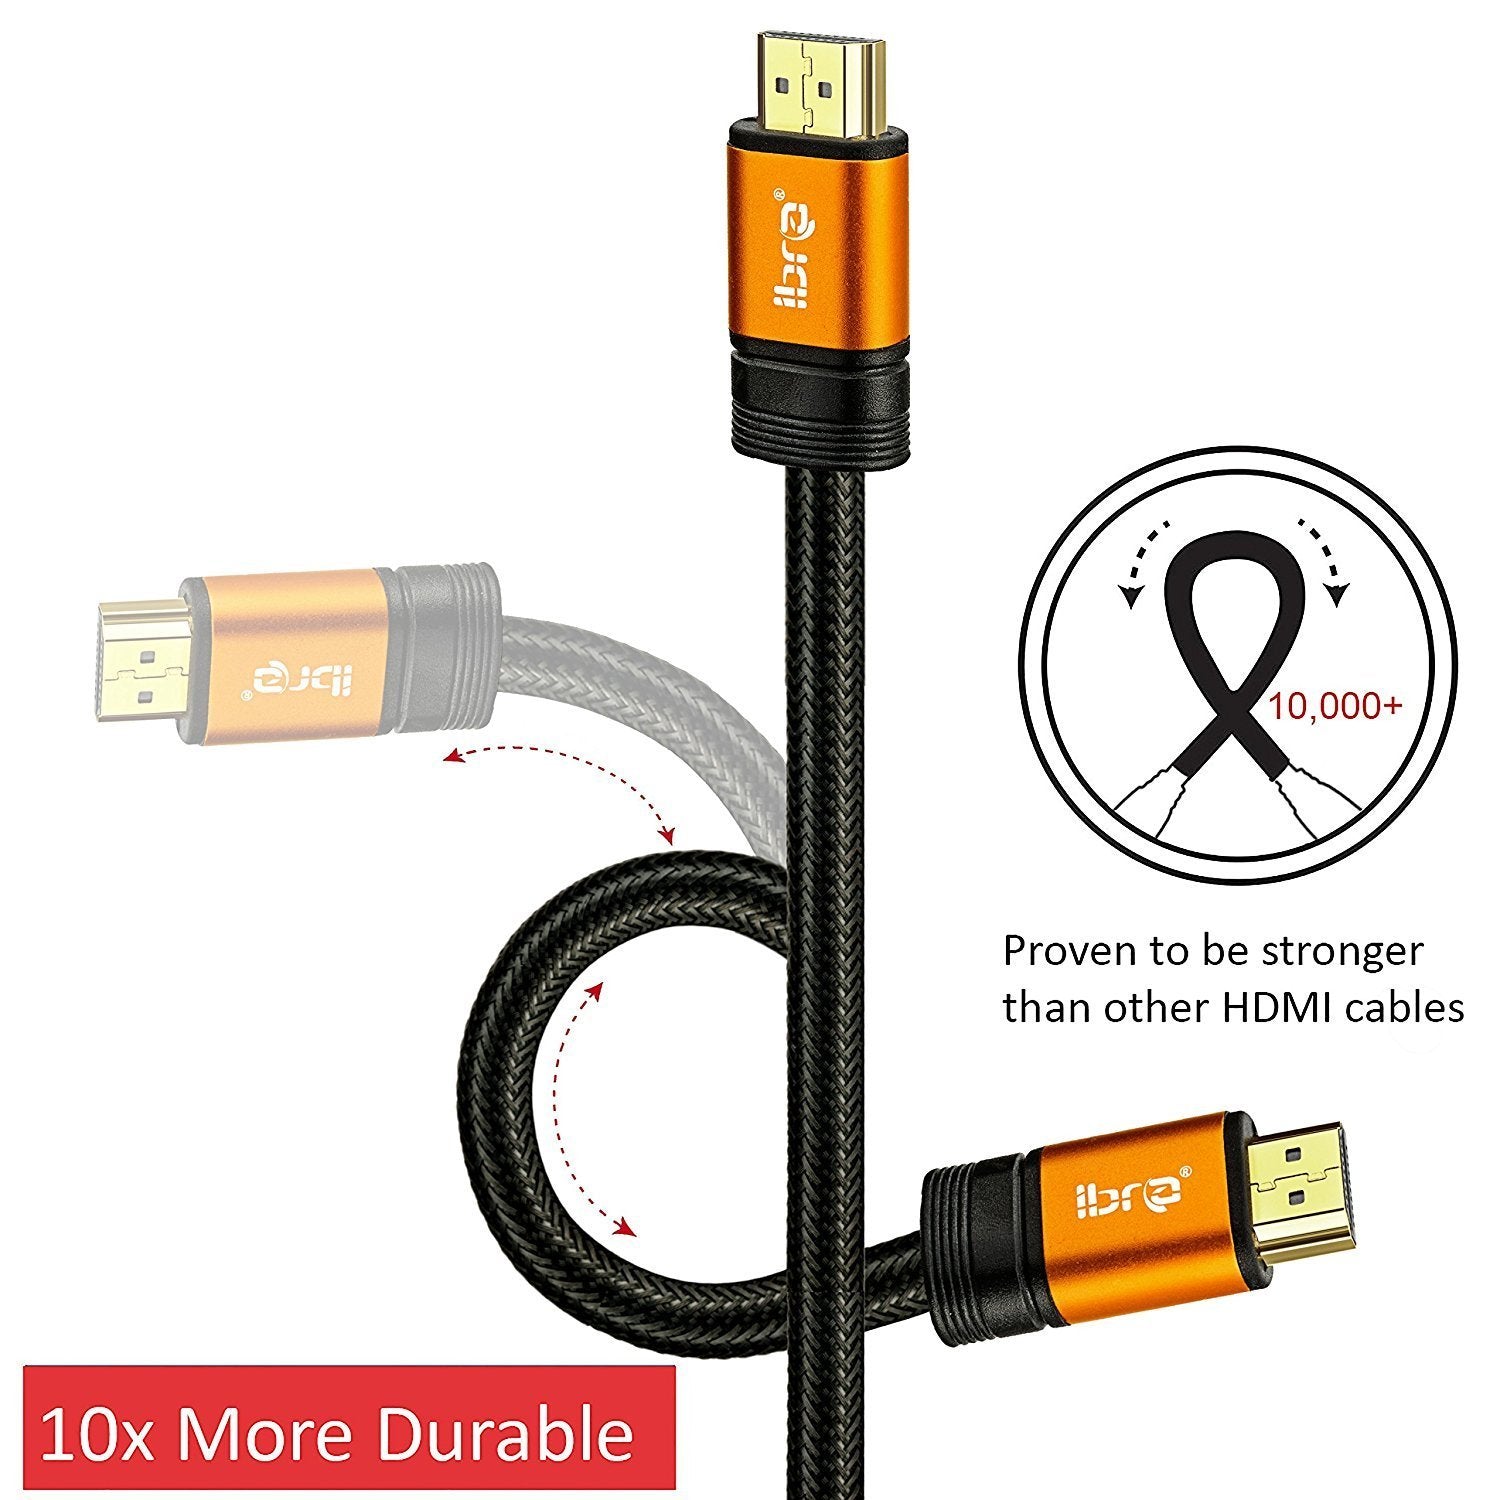 IBRA Orange HDMI Cable 4M - UHD HDMI 2.0 (4K@60Hz) Ready -18Gbps-28AWG Braided Cord -Gold Plated Connectors -Ethernet,Audio Return-Video 4K 2160p,HD 1080p,3D -Xbox PlayStation PS3 PS4 PC Apple TV